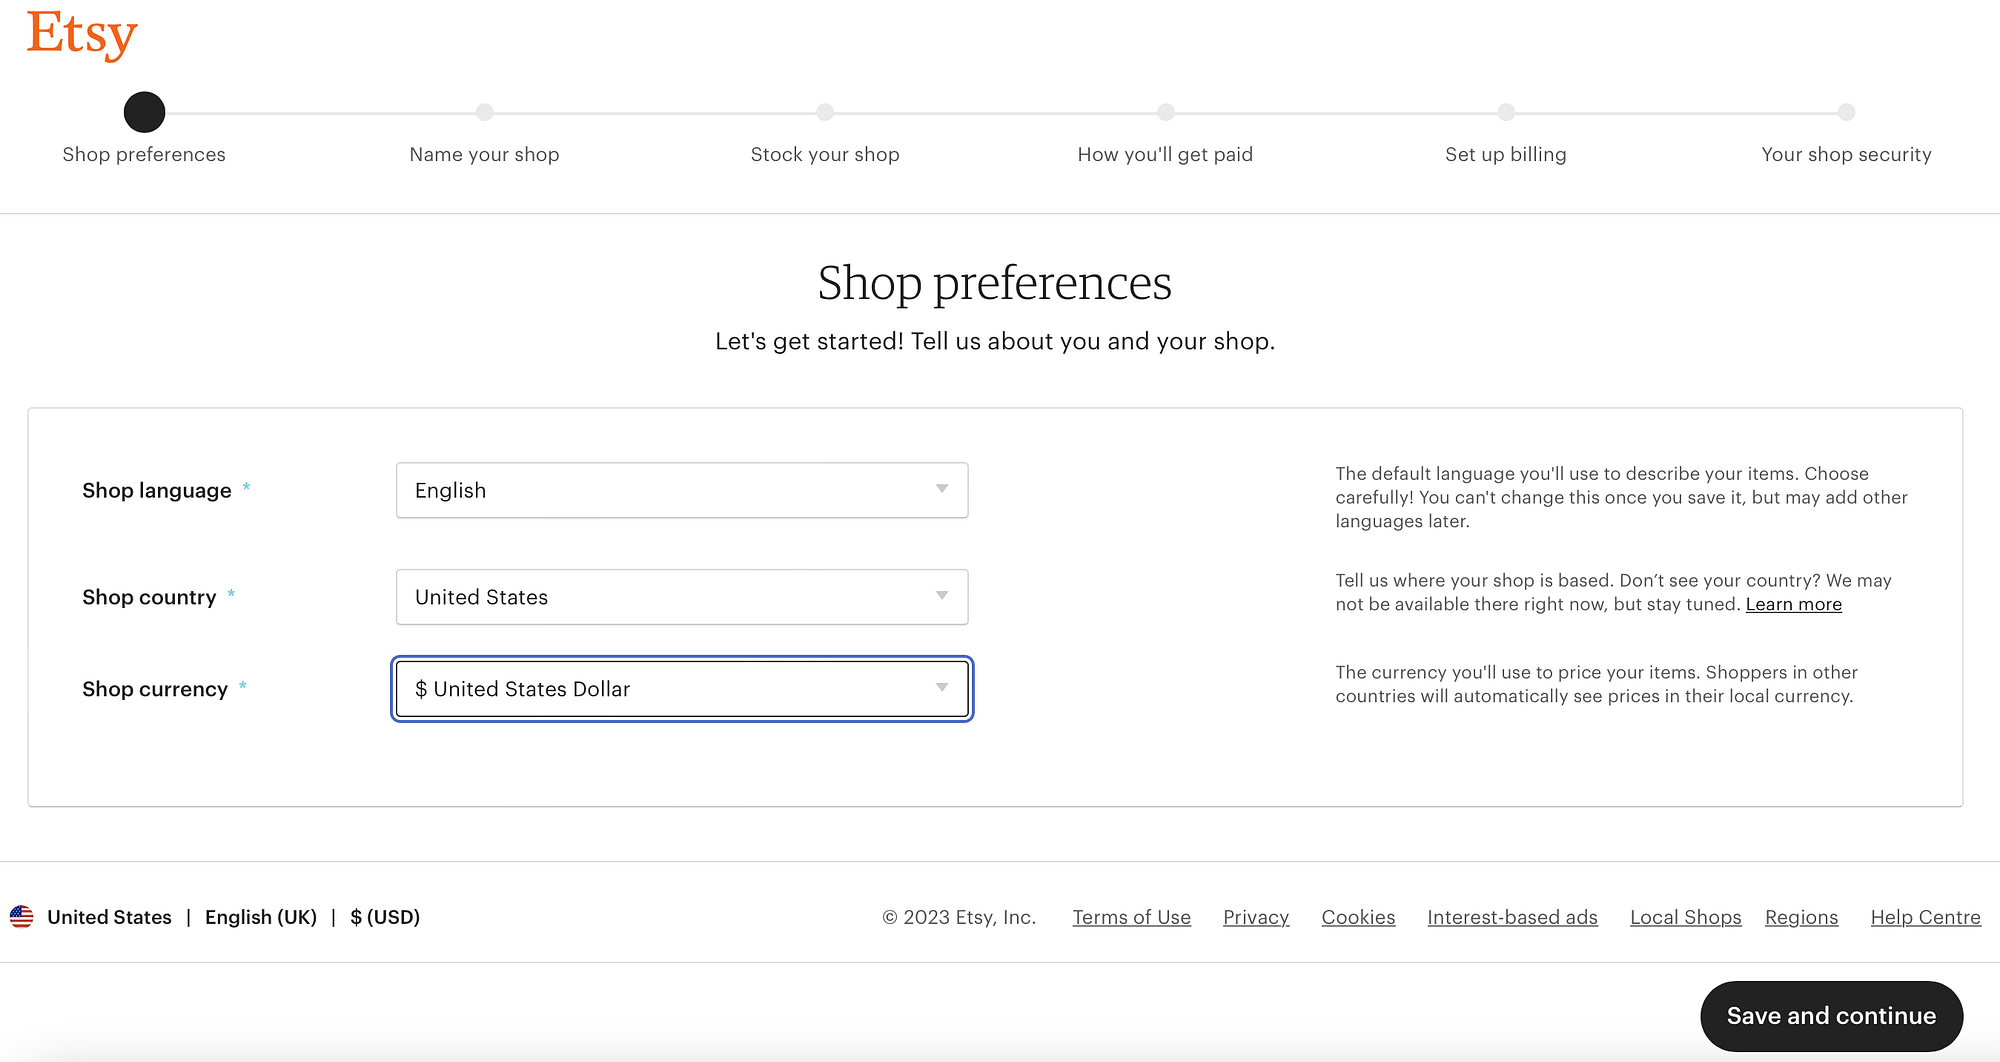 How to sell on Etsy by entering Etsy shop preferences for language, country, and currency.